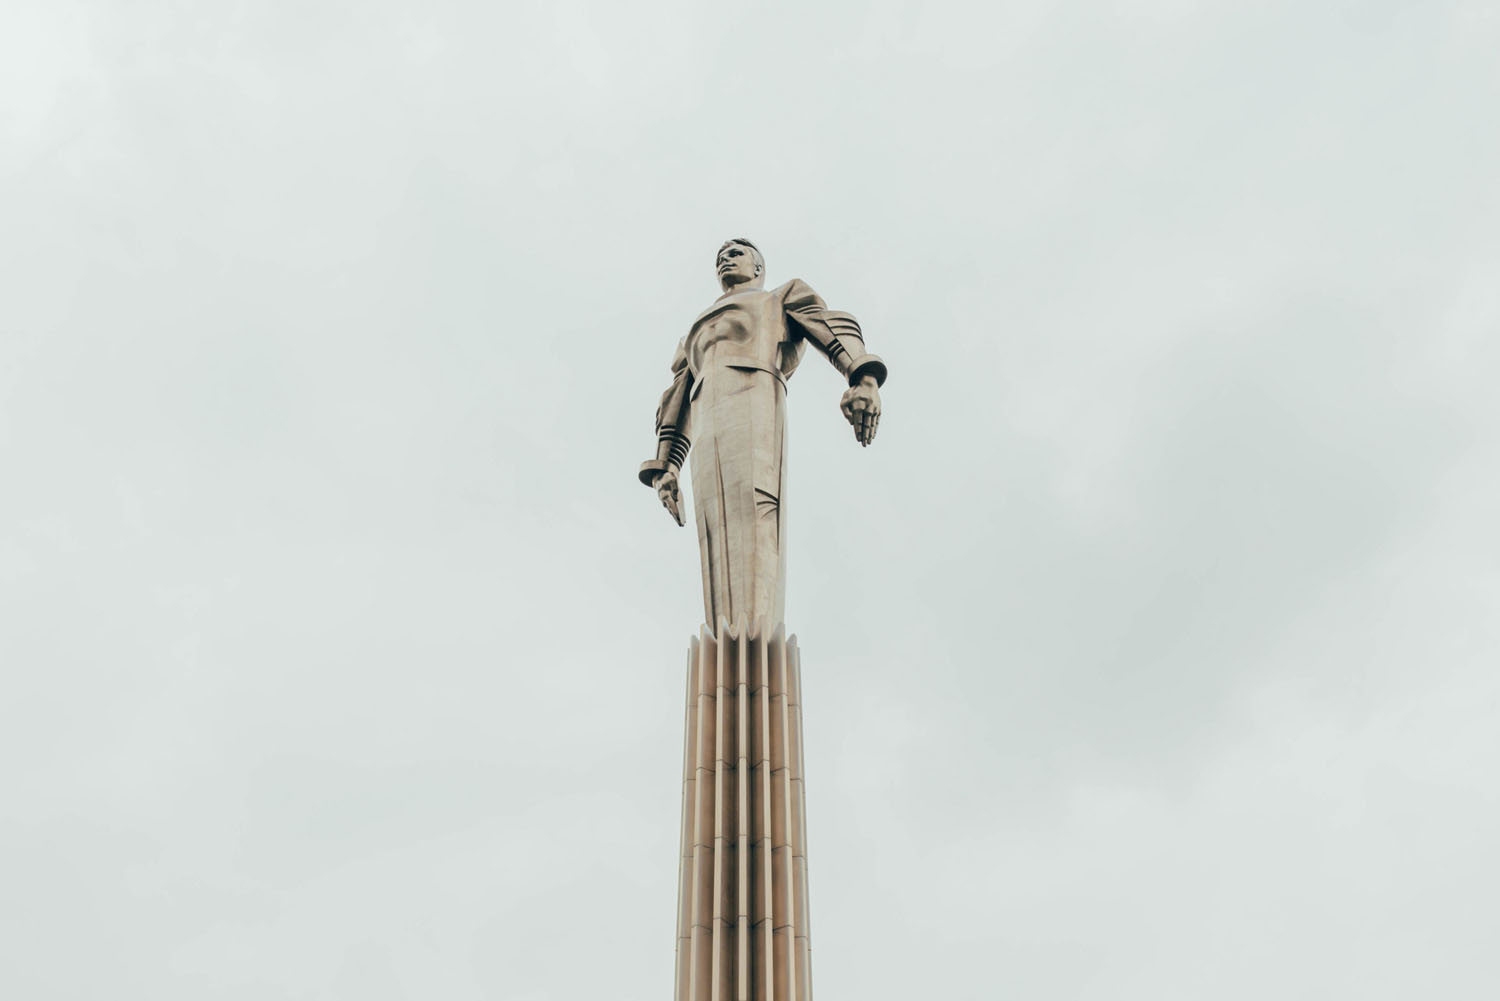 Monument to Gagarin erected in 1980 for the Olympic Games, Moscow.